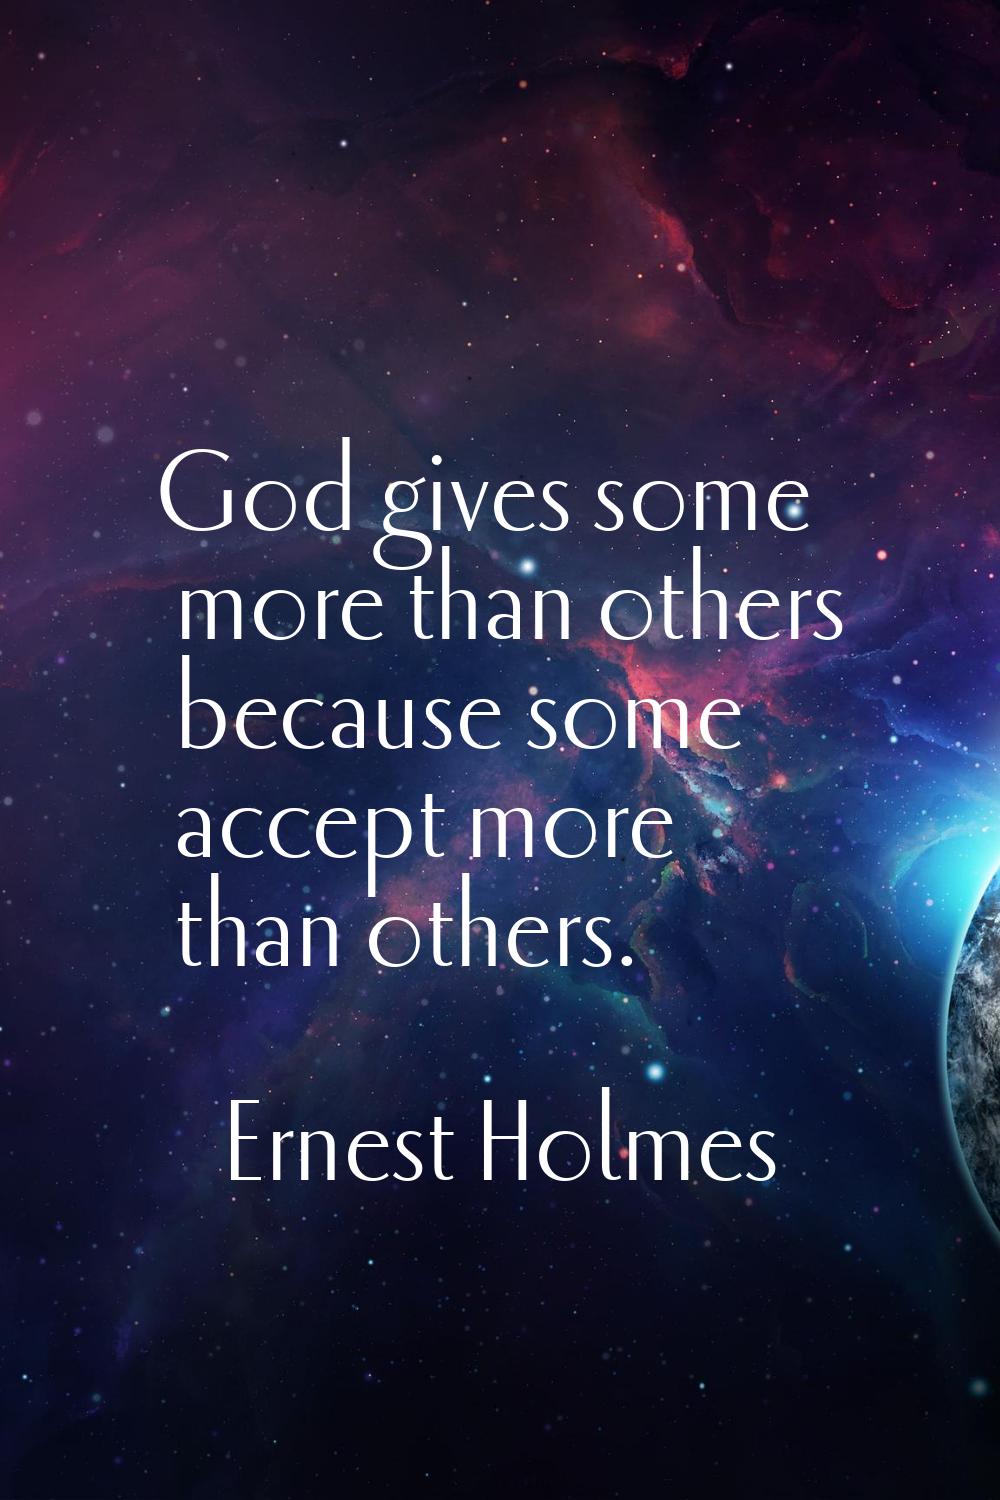 God gives some more than others because some accept more than others.